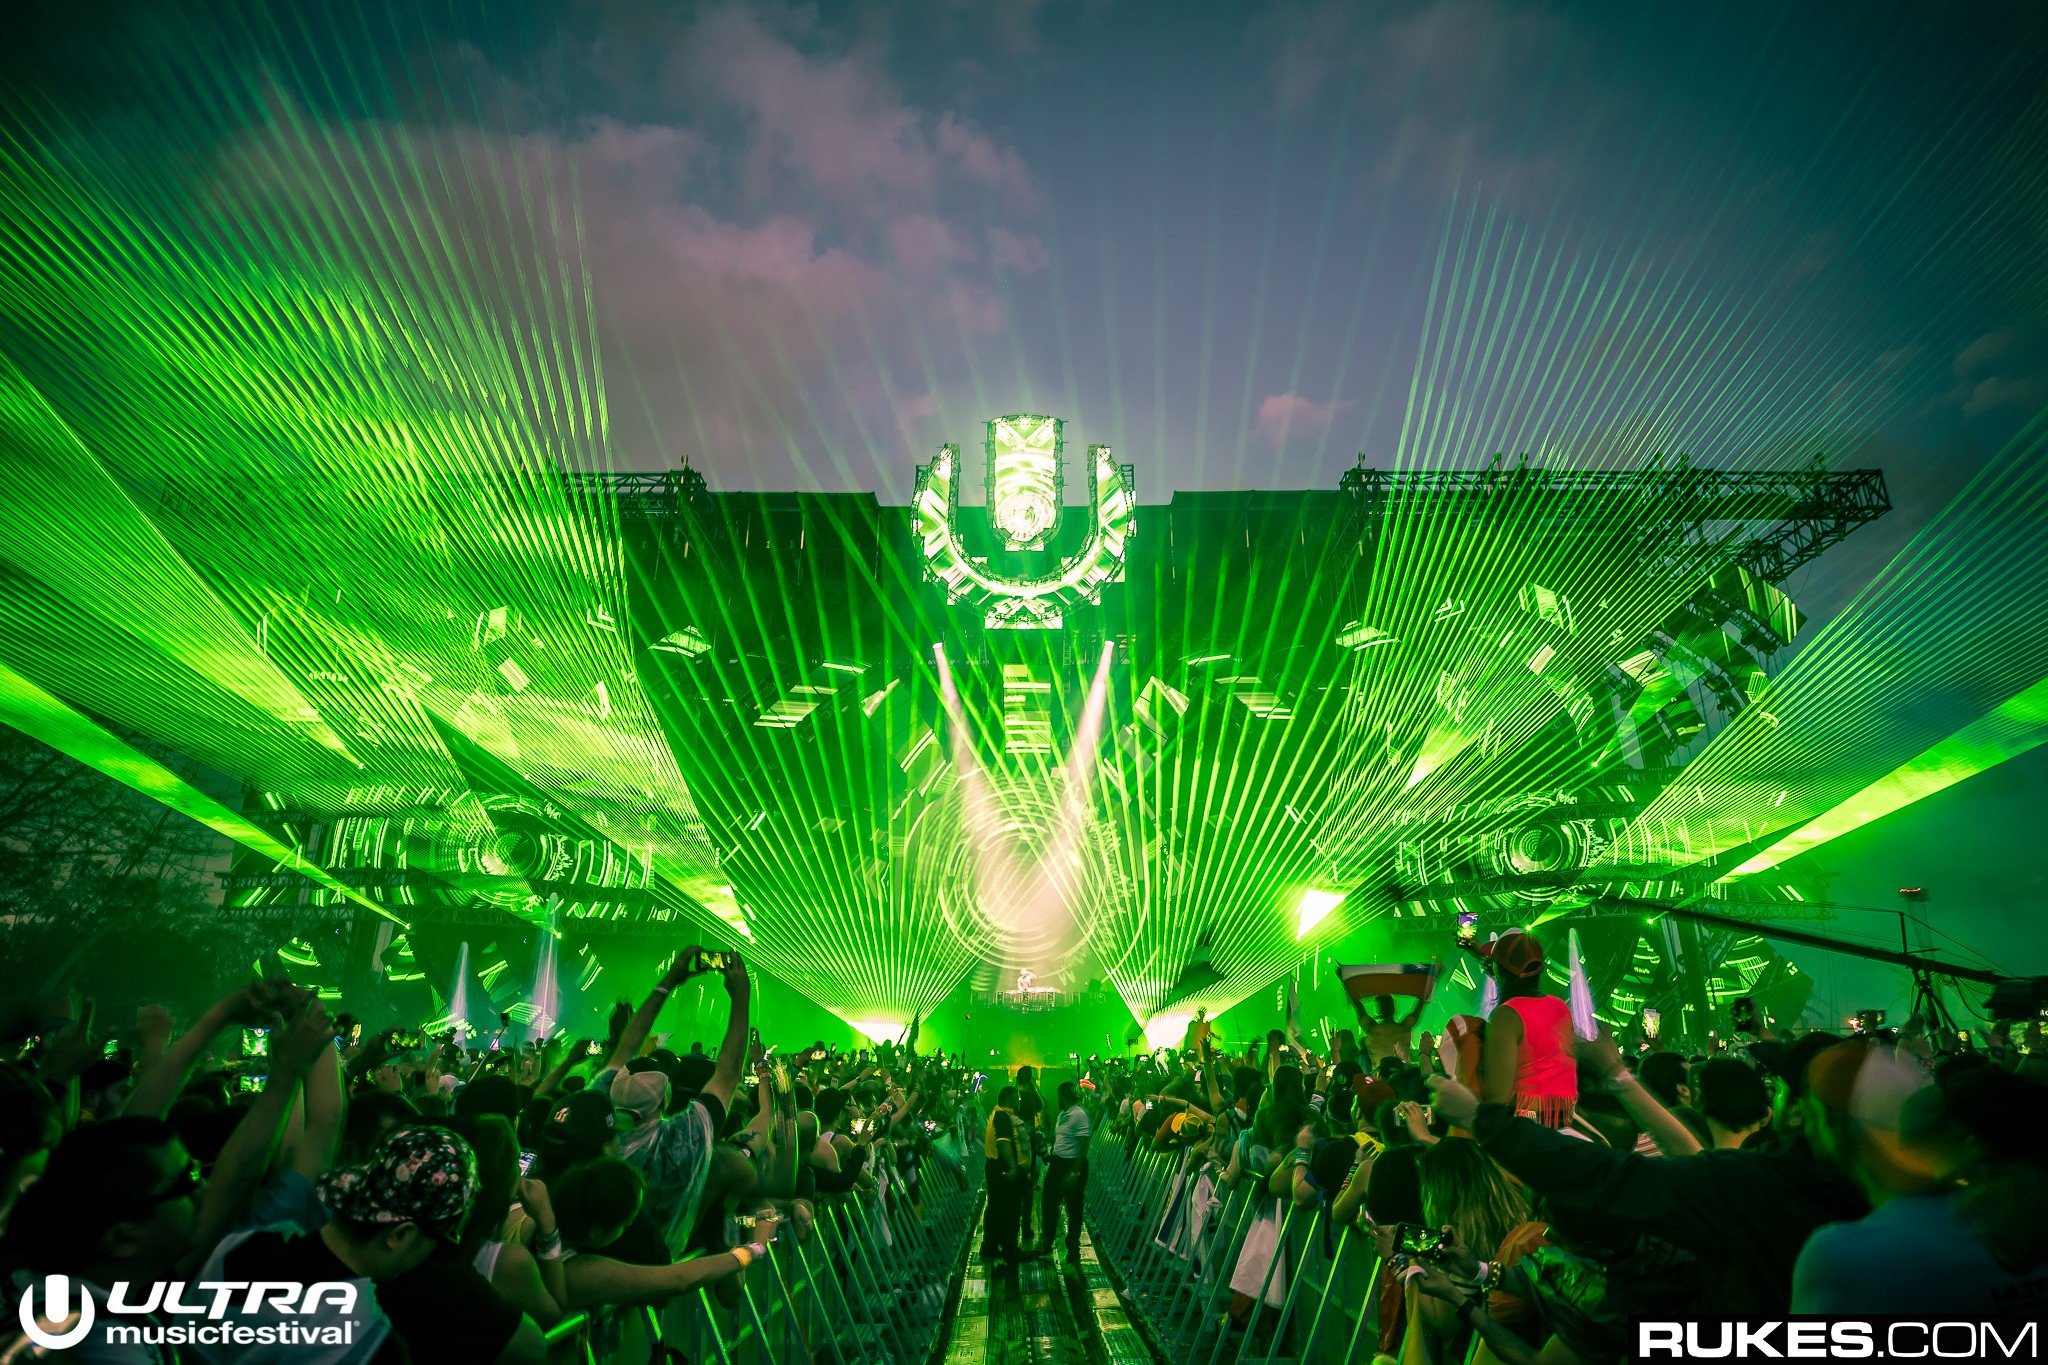 crowds, Ultra Music Festival, Rukes.com, Stages, Lights, Photography, Lasers, Music Wallpaper